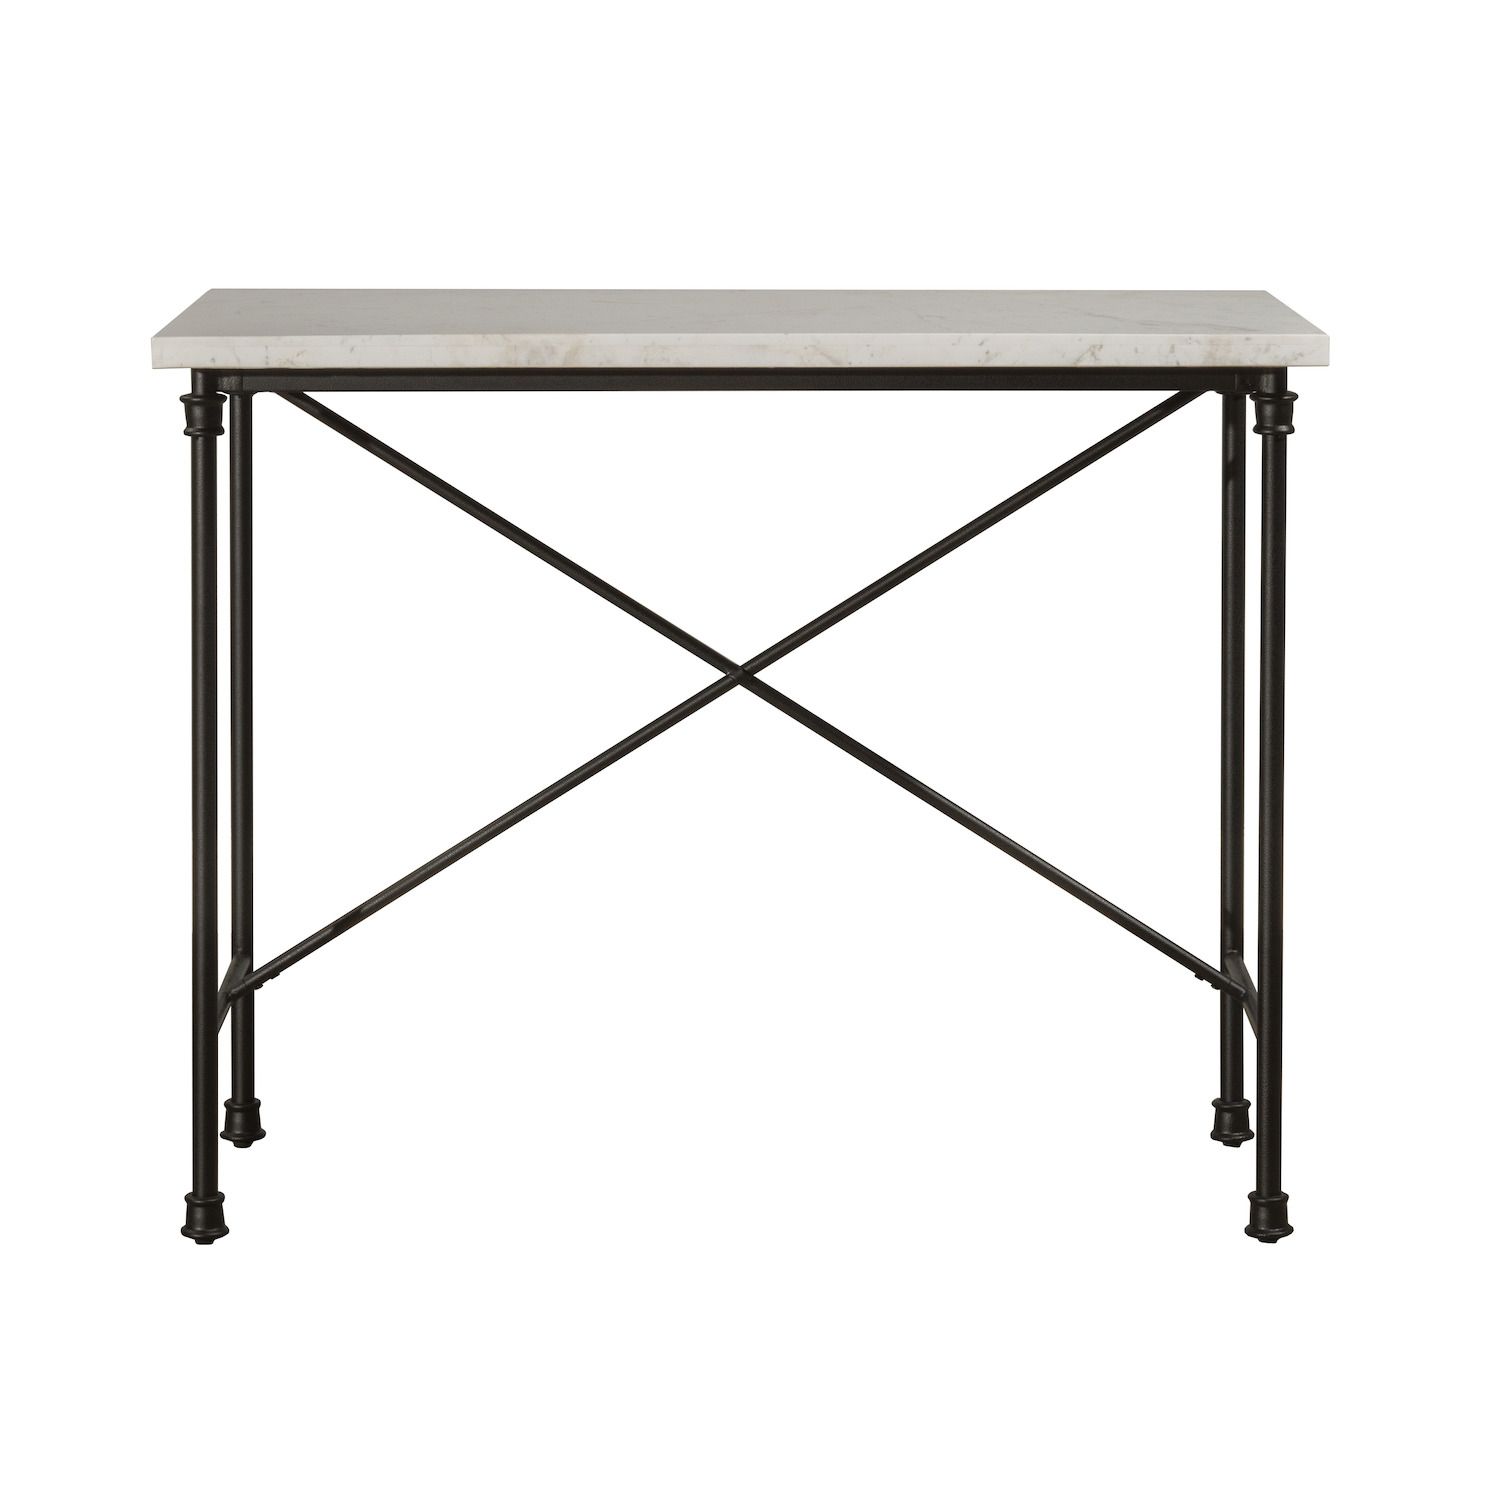 Image for Hillsdale Furniture Castille Counter Height Table at Kohl's.